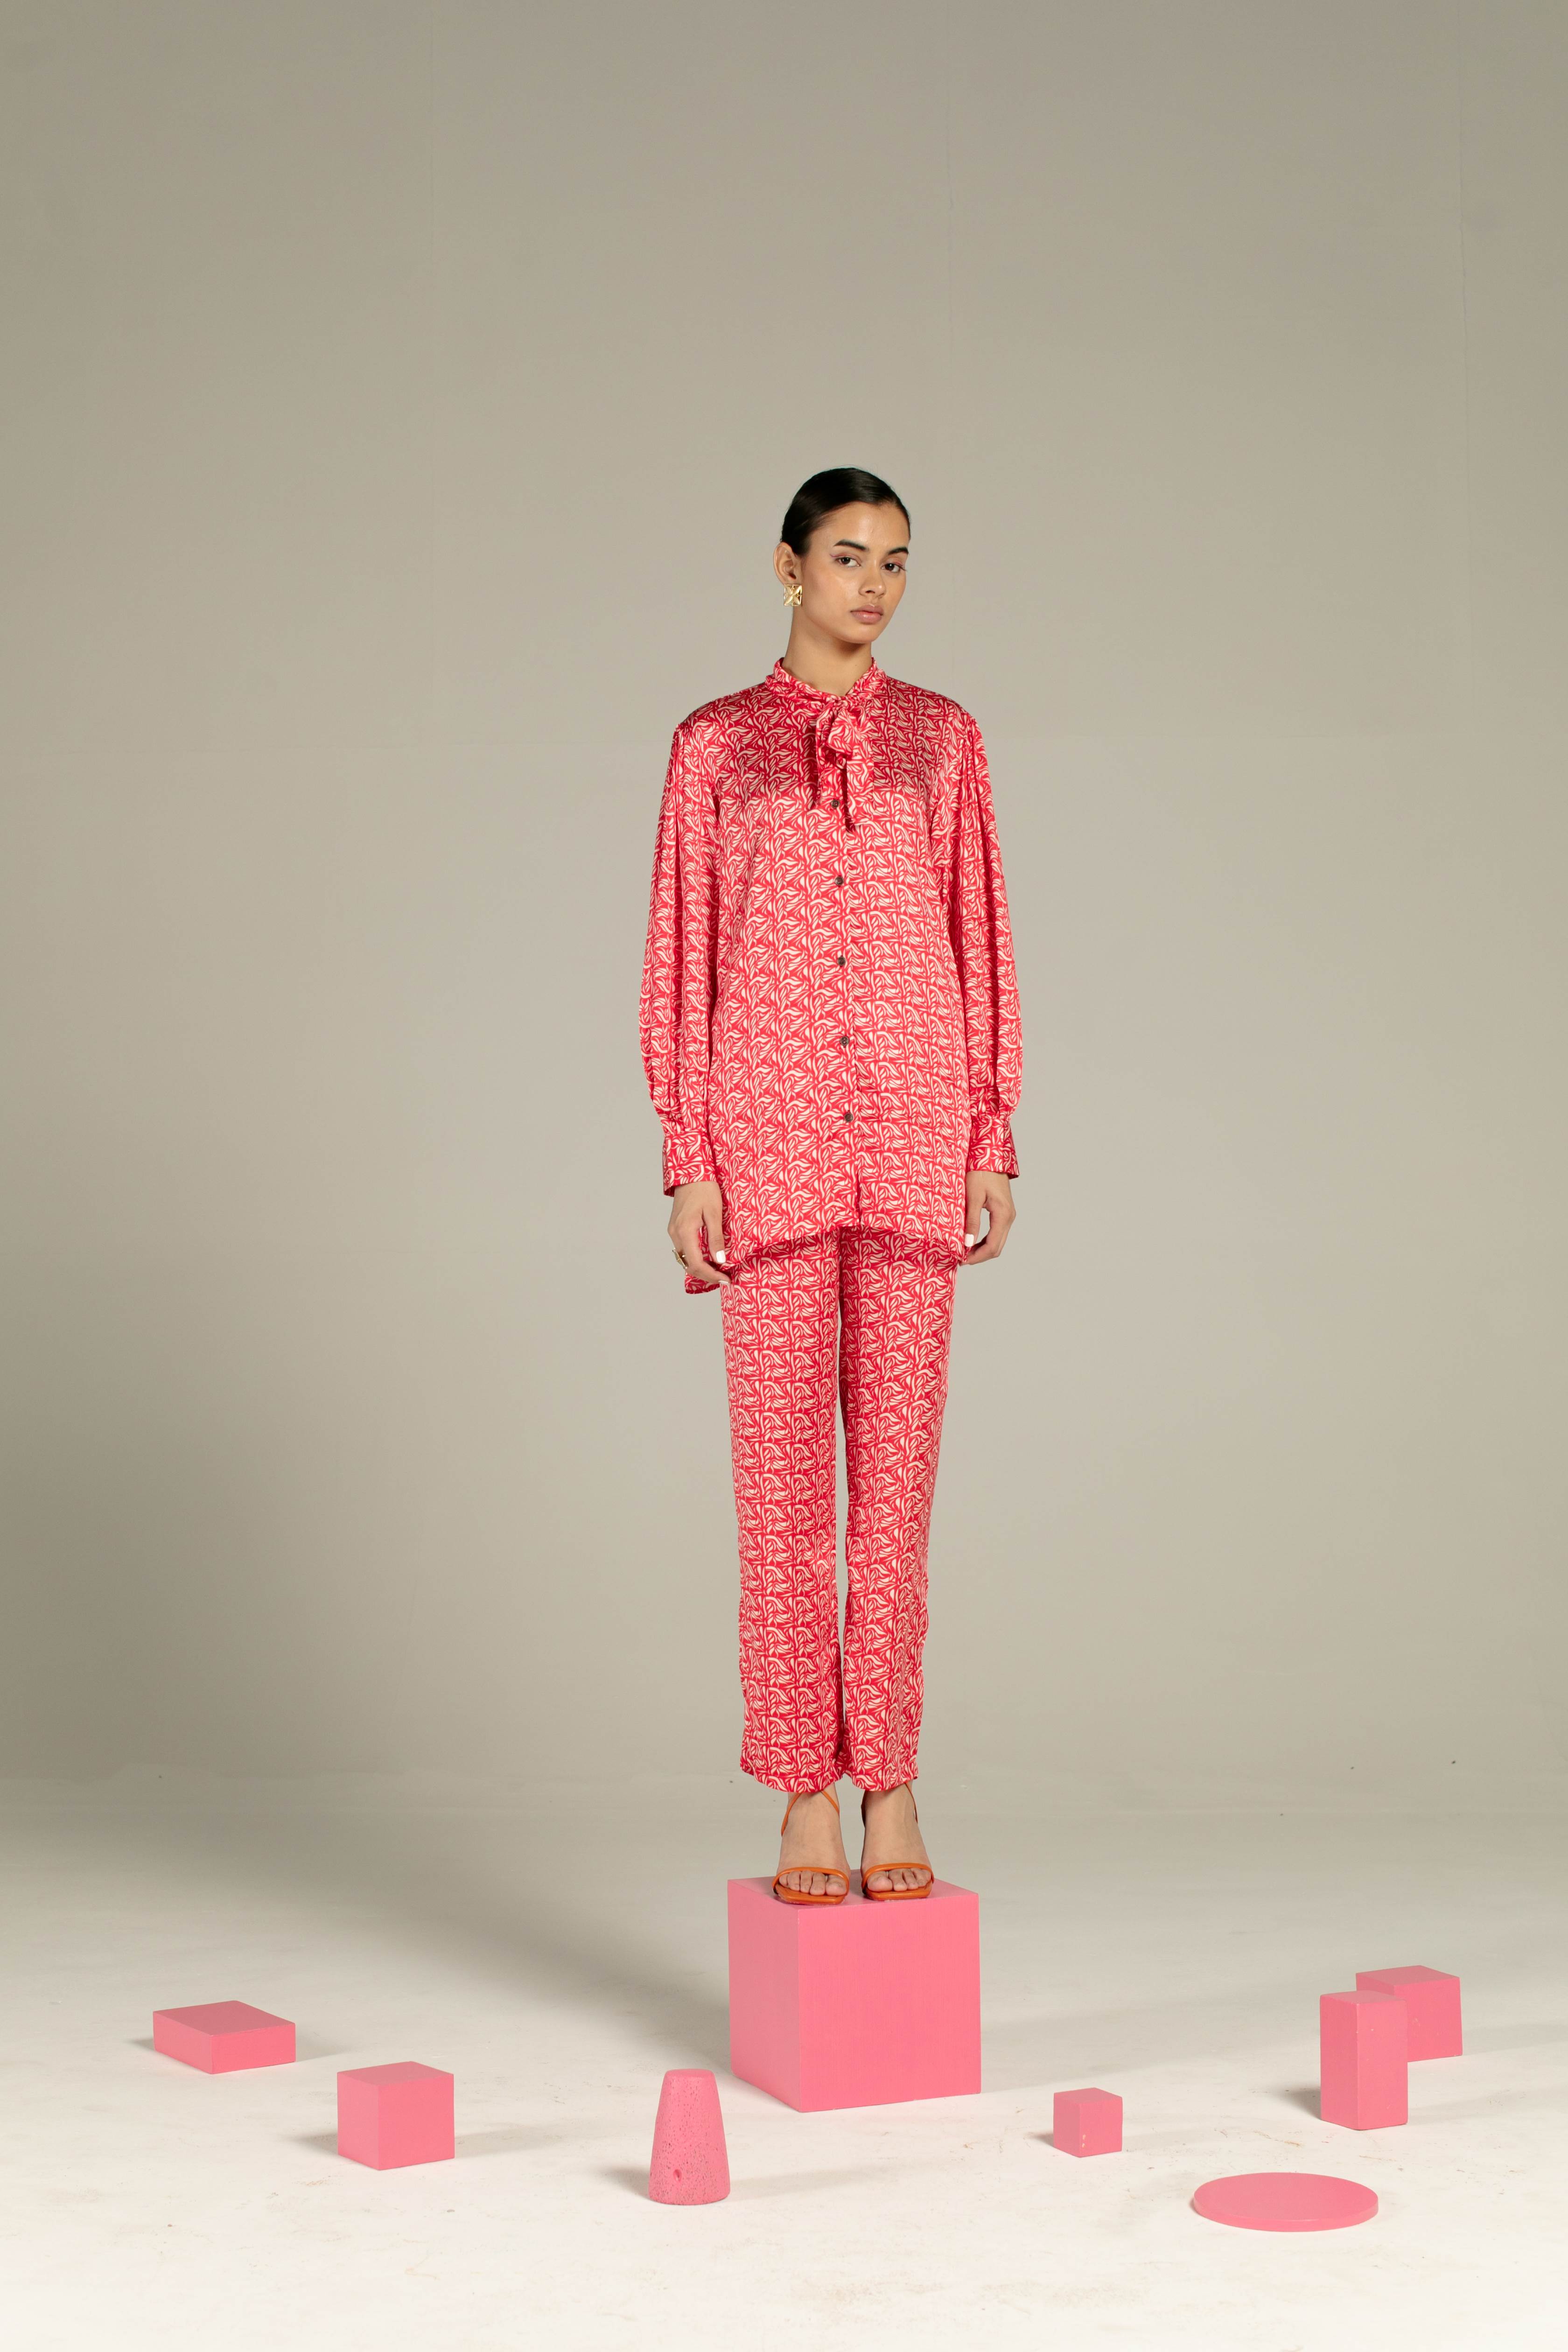 Hamilton Knot Shirt With Trousers Co-Ord